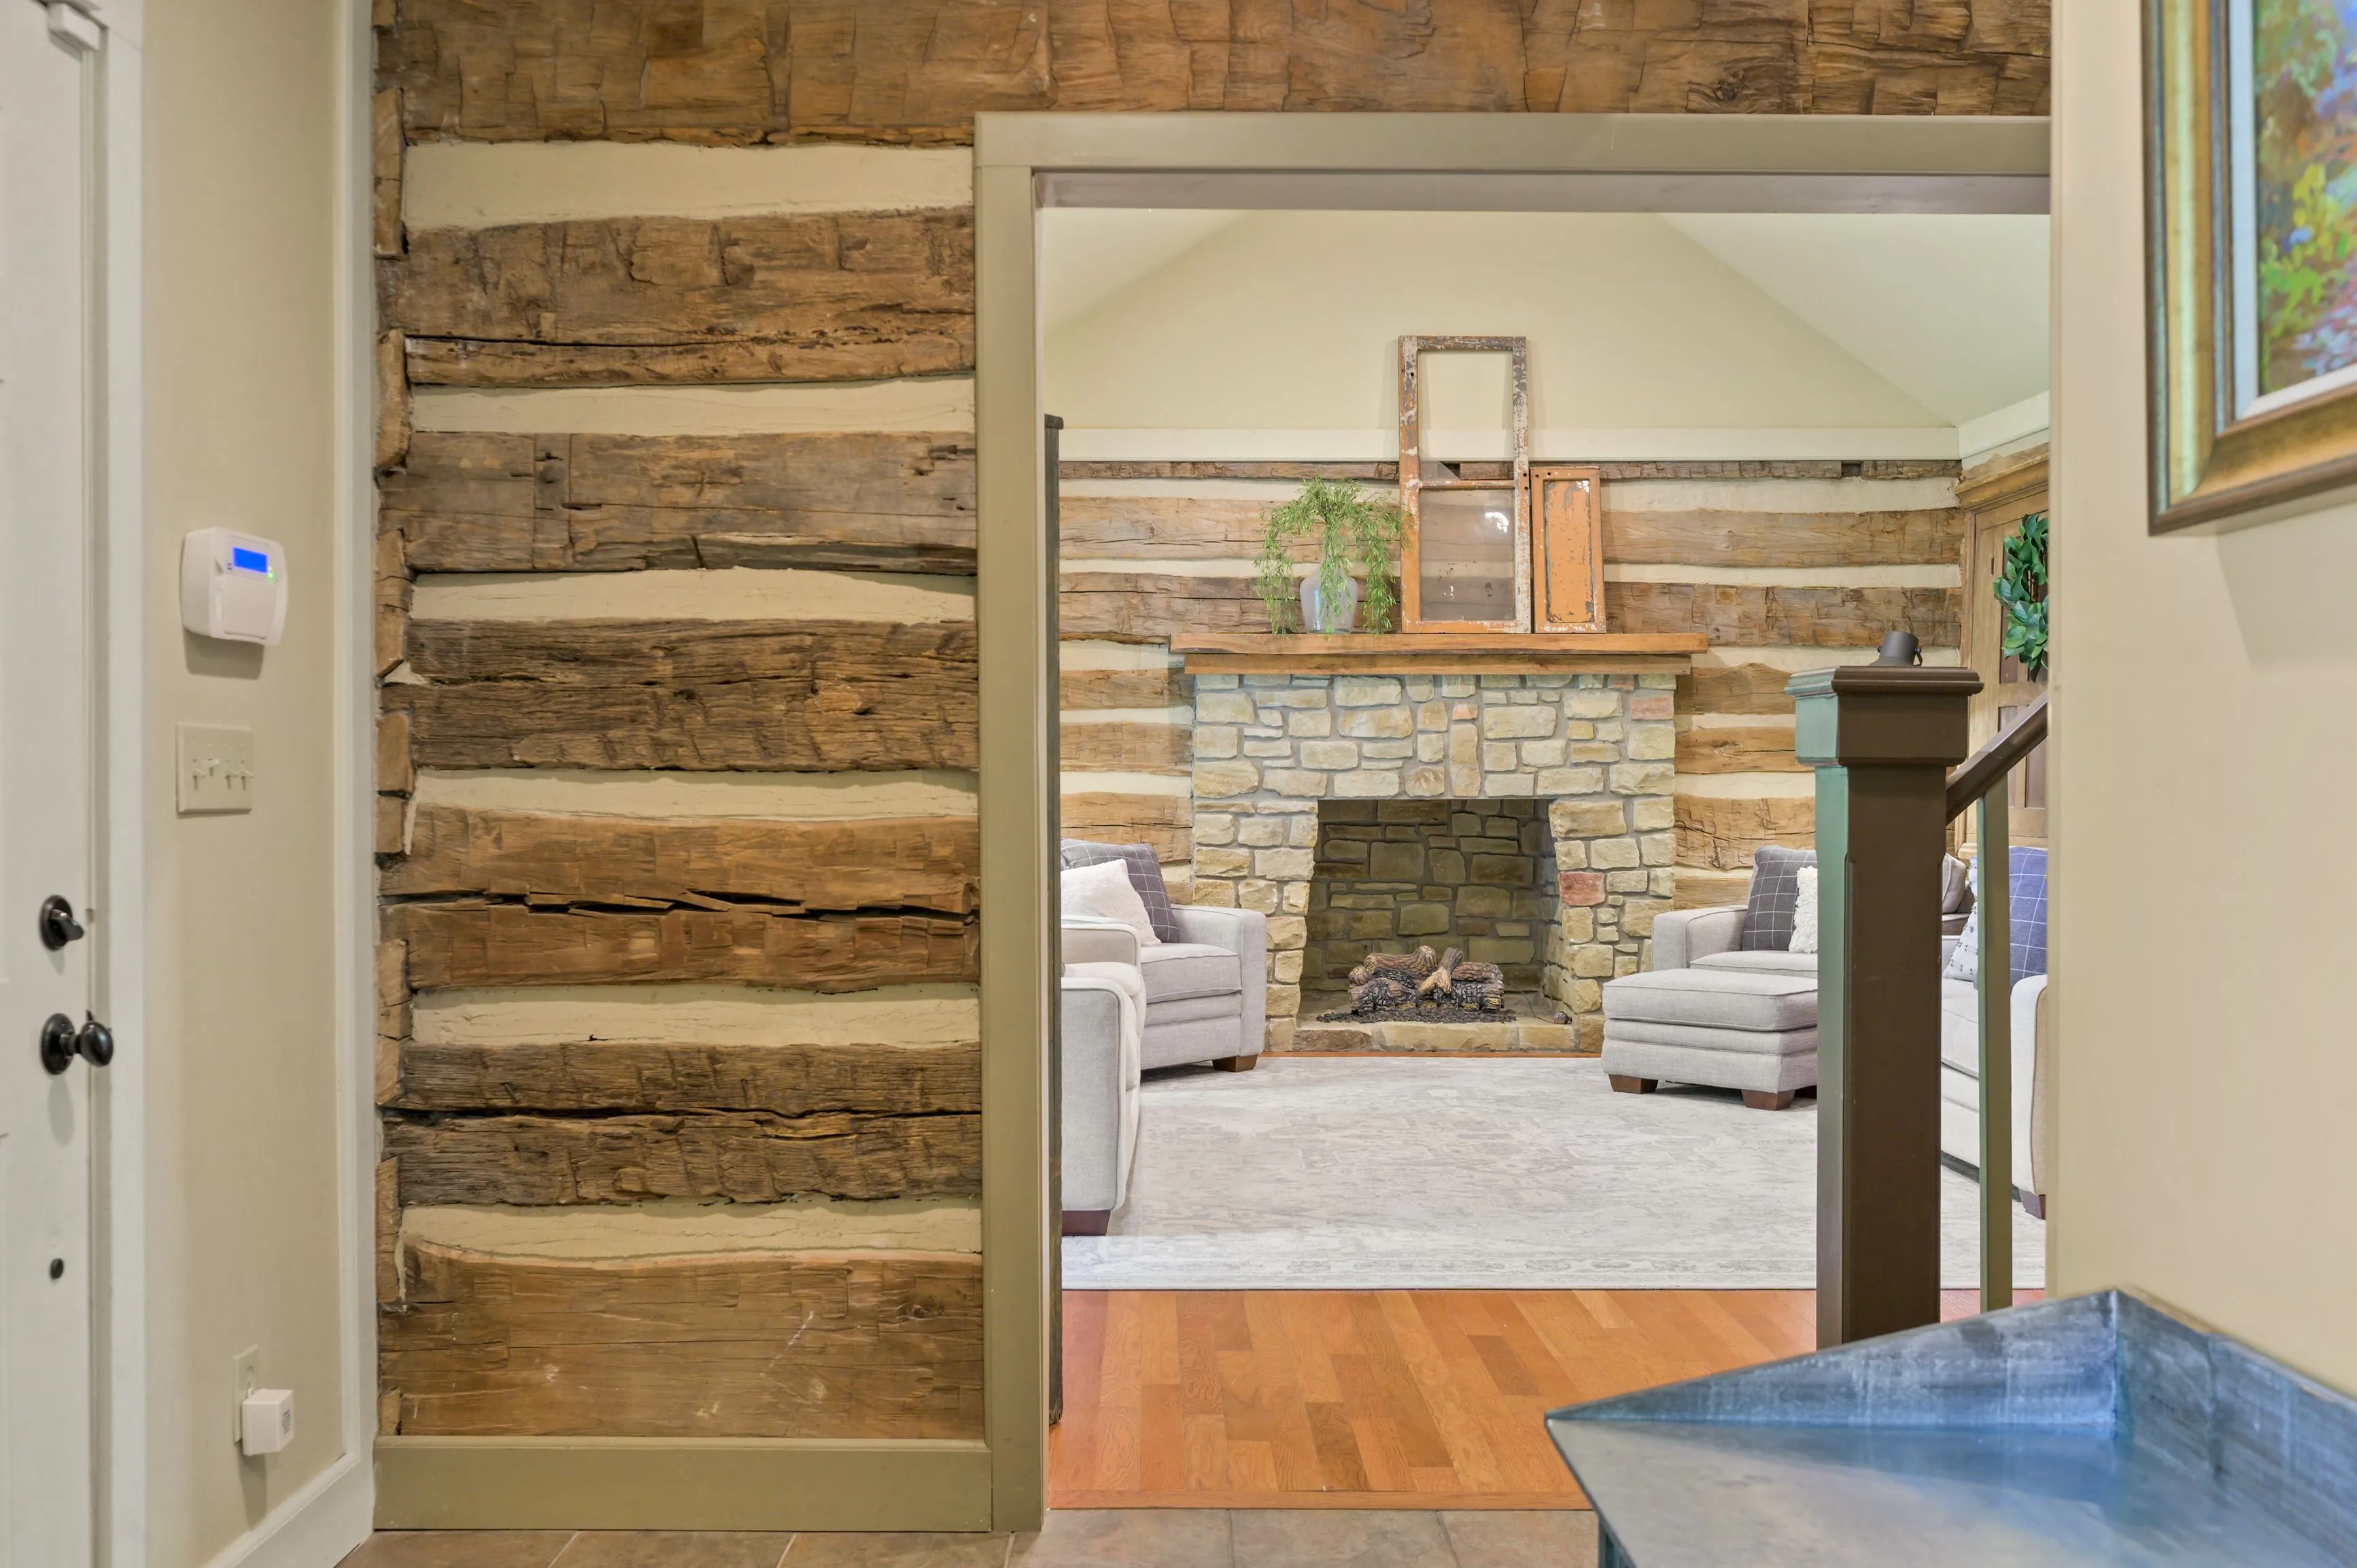 View from a hallway with rustic log cabin walls into a cozy living room with a stone fireplace, comfortable sofas, and a decorative mirror above the mantelpiece.